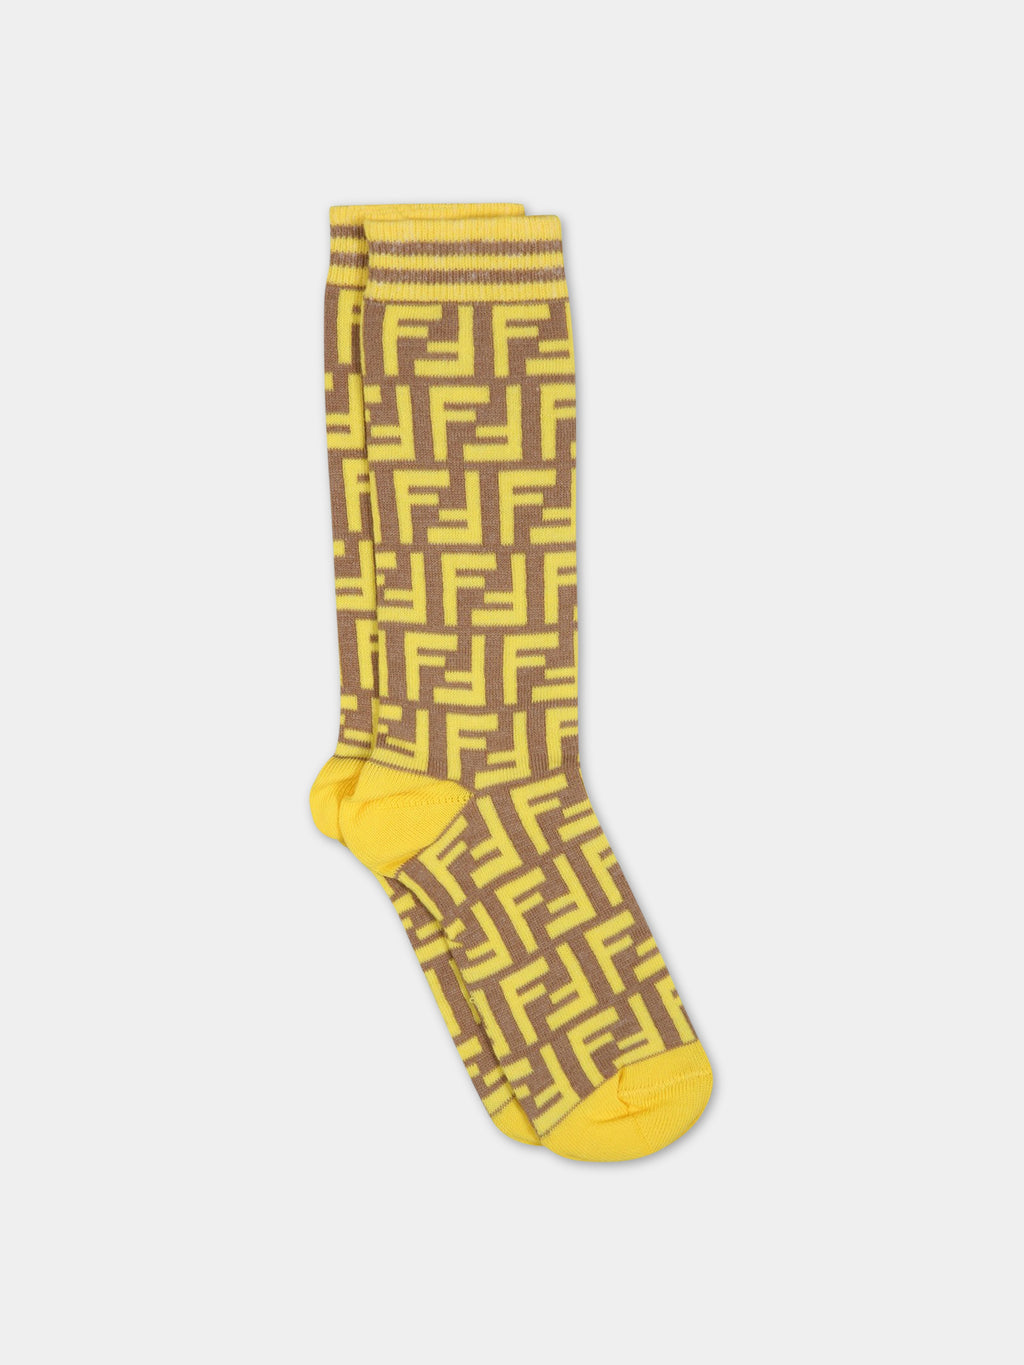 Brown socks for kids with yelllow FF